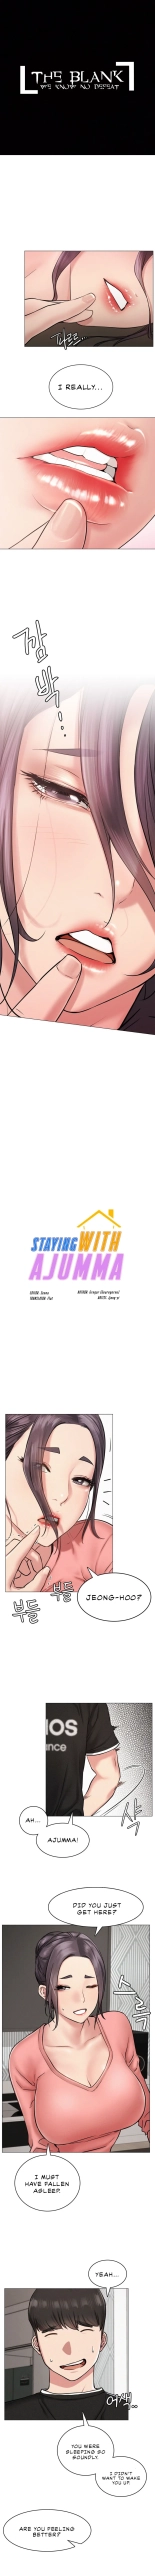 Staying with Ajumma : page 27